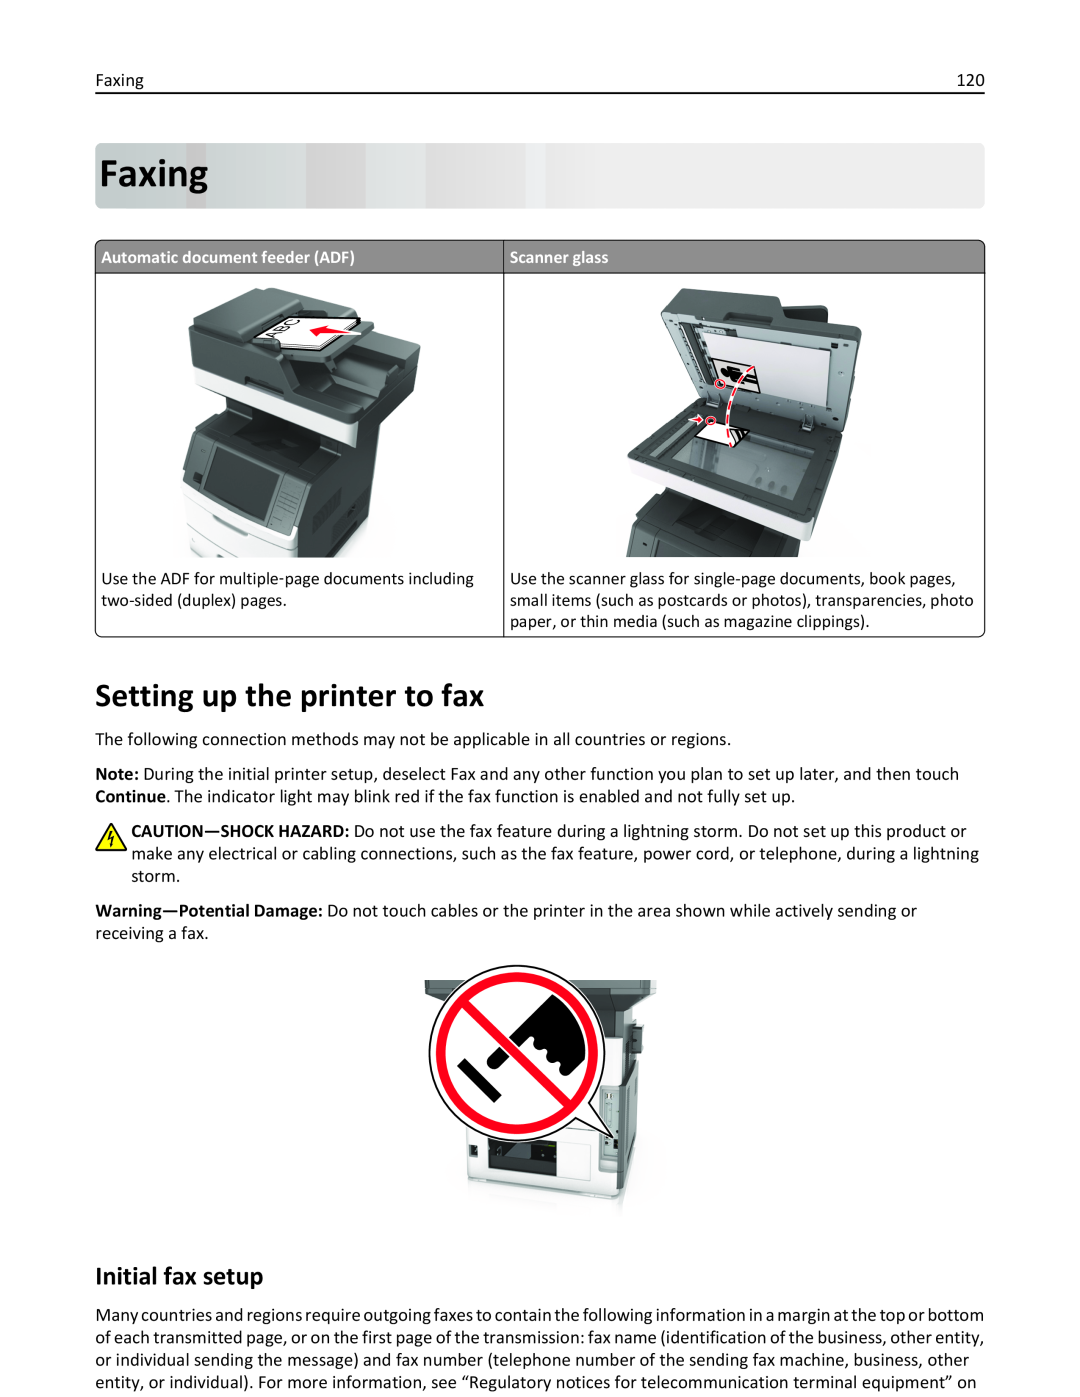 Lexmark MX710DHE, 24T7310, 237, 037 manual Faxing, Setting up the printer to fax, Initial fax setup 